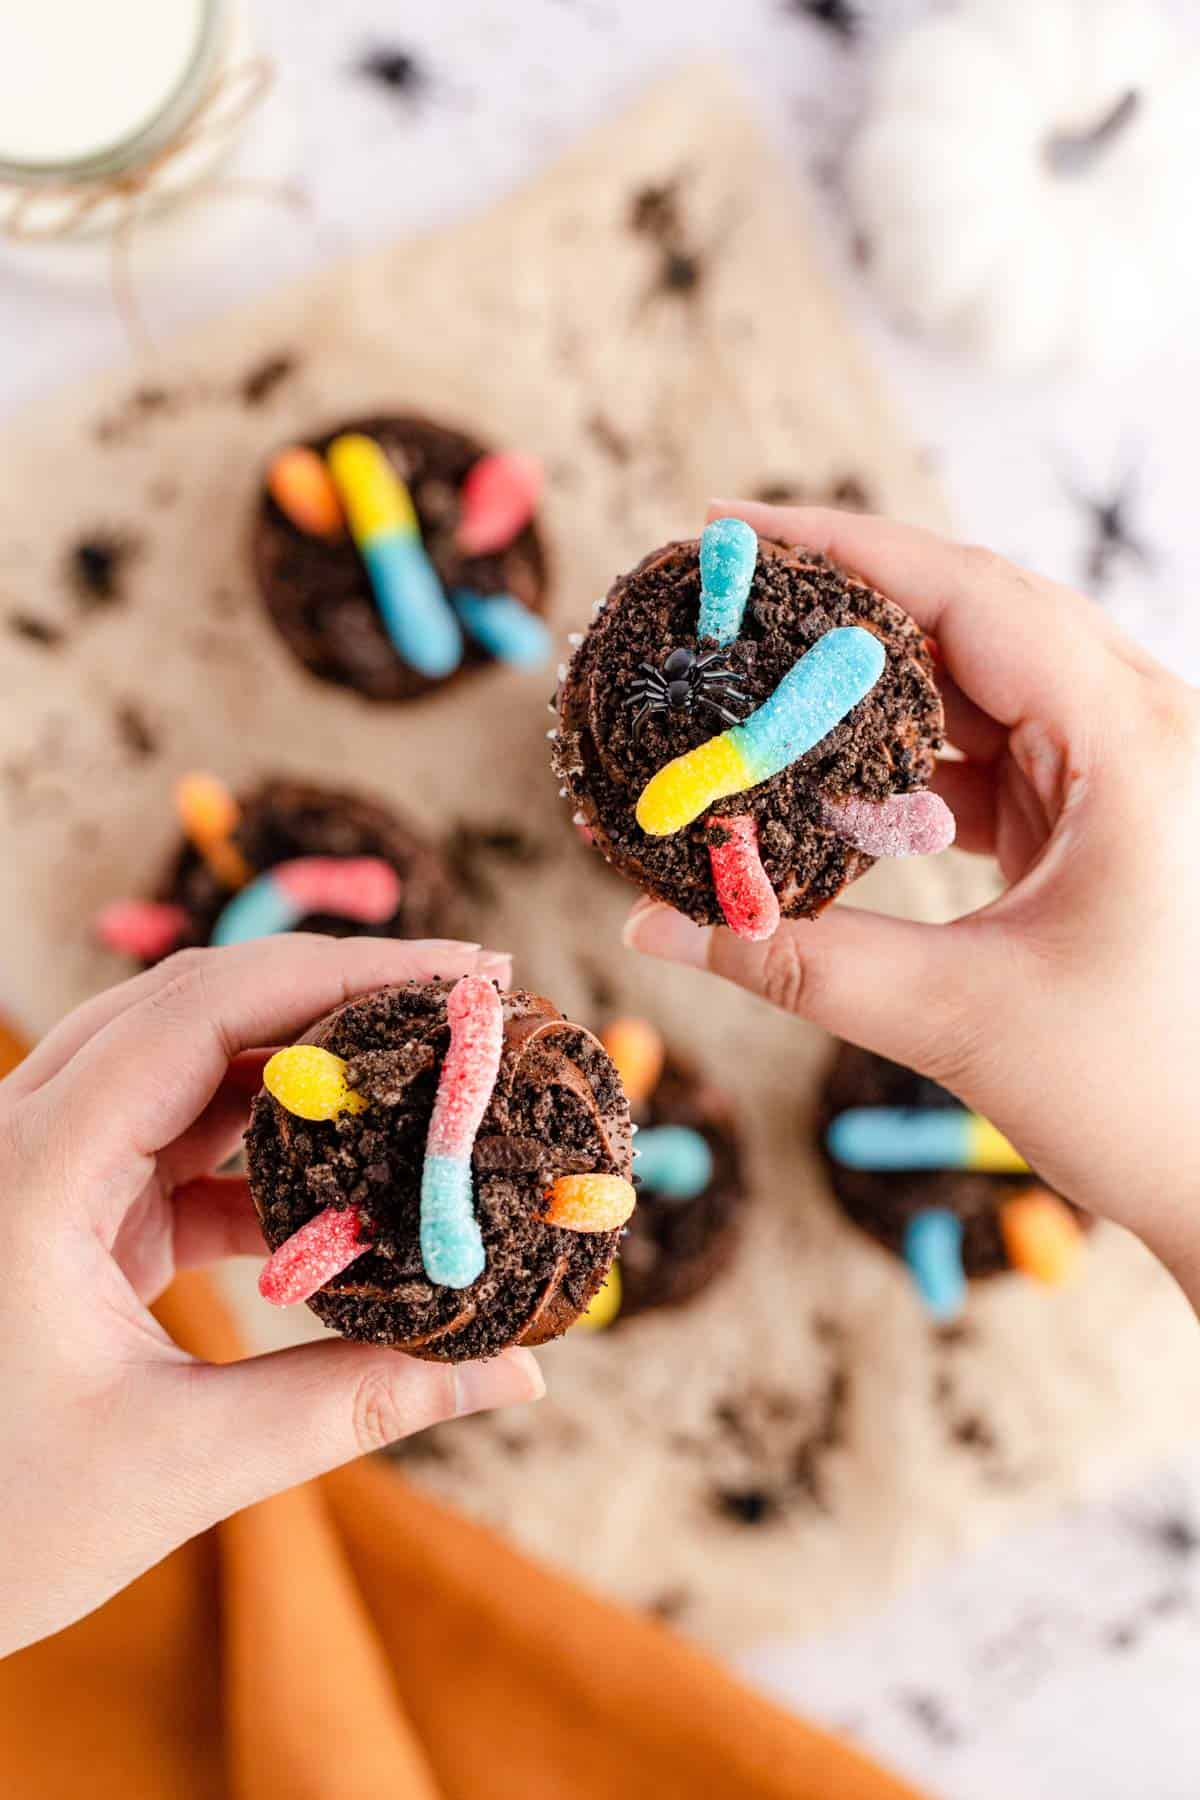 Two gummy worm dirt cupcakes held up by hands showing the overhead view of the cupcake.